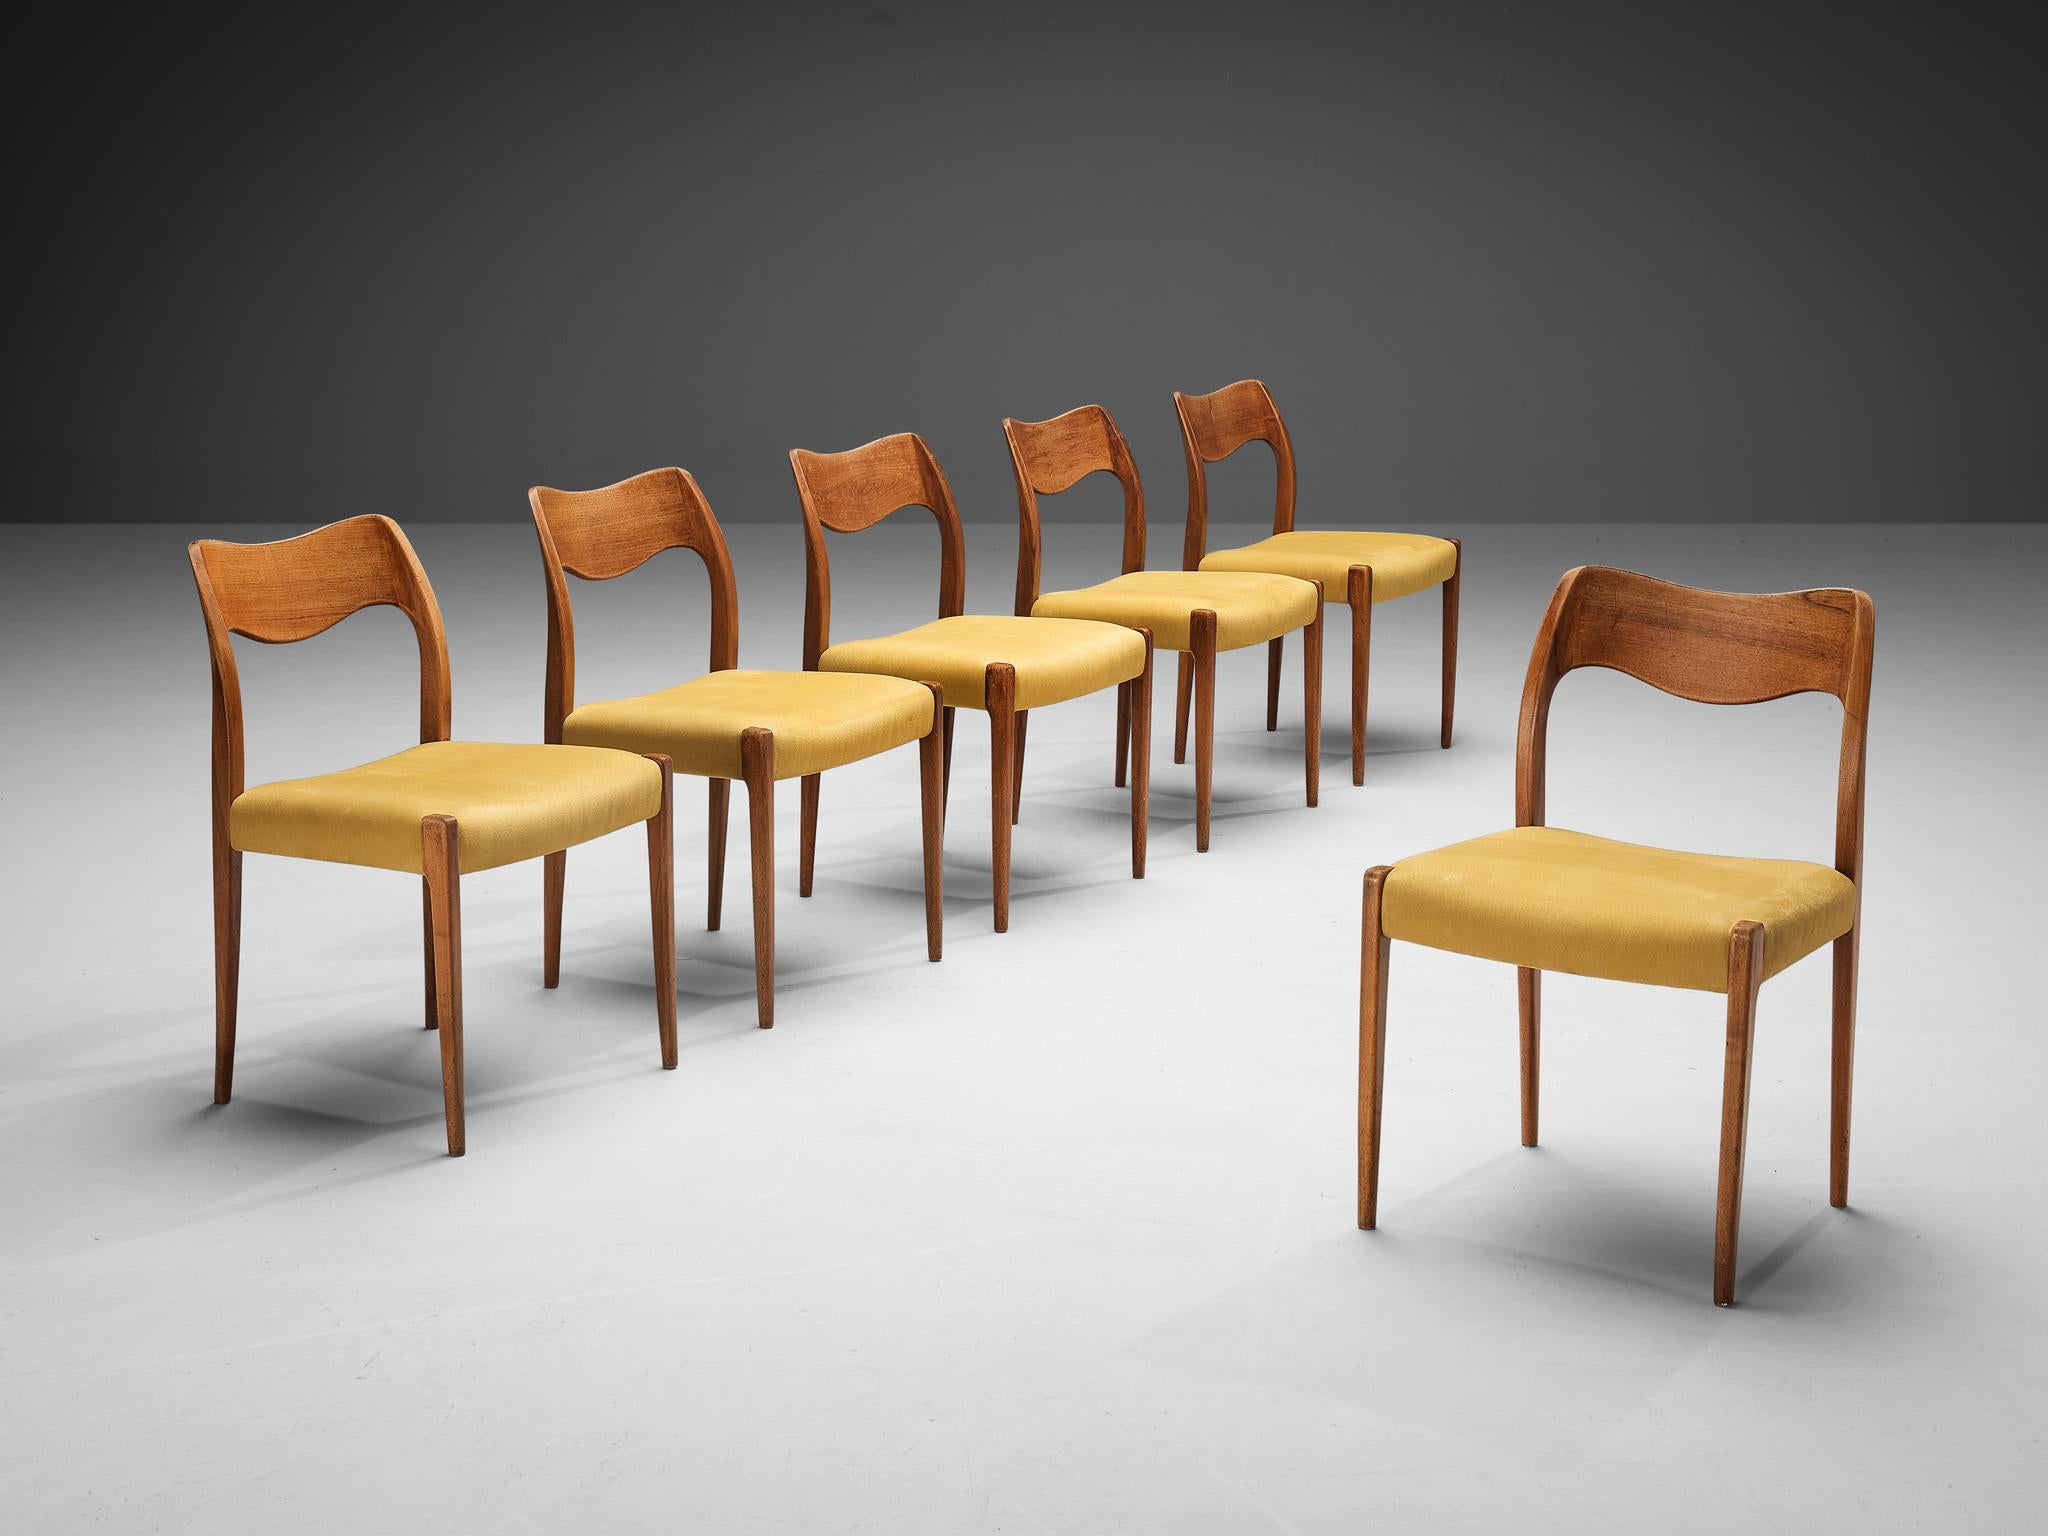 Niels O. Møller, set of six dining chairs, model 71, teak, fabric upholstery, Denmark, 1950s.

These chairs designed by Niels Møller show subtle lines and beautiful curves of the woodwork. The backs of the chairs are feature the iconic Møller waved